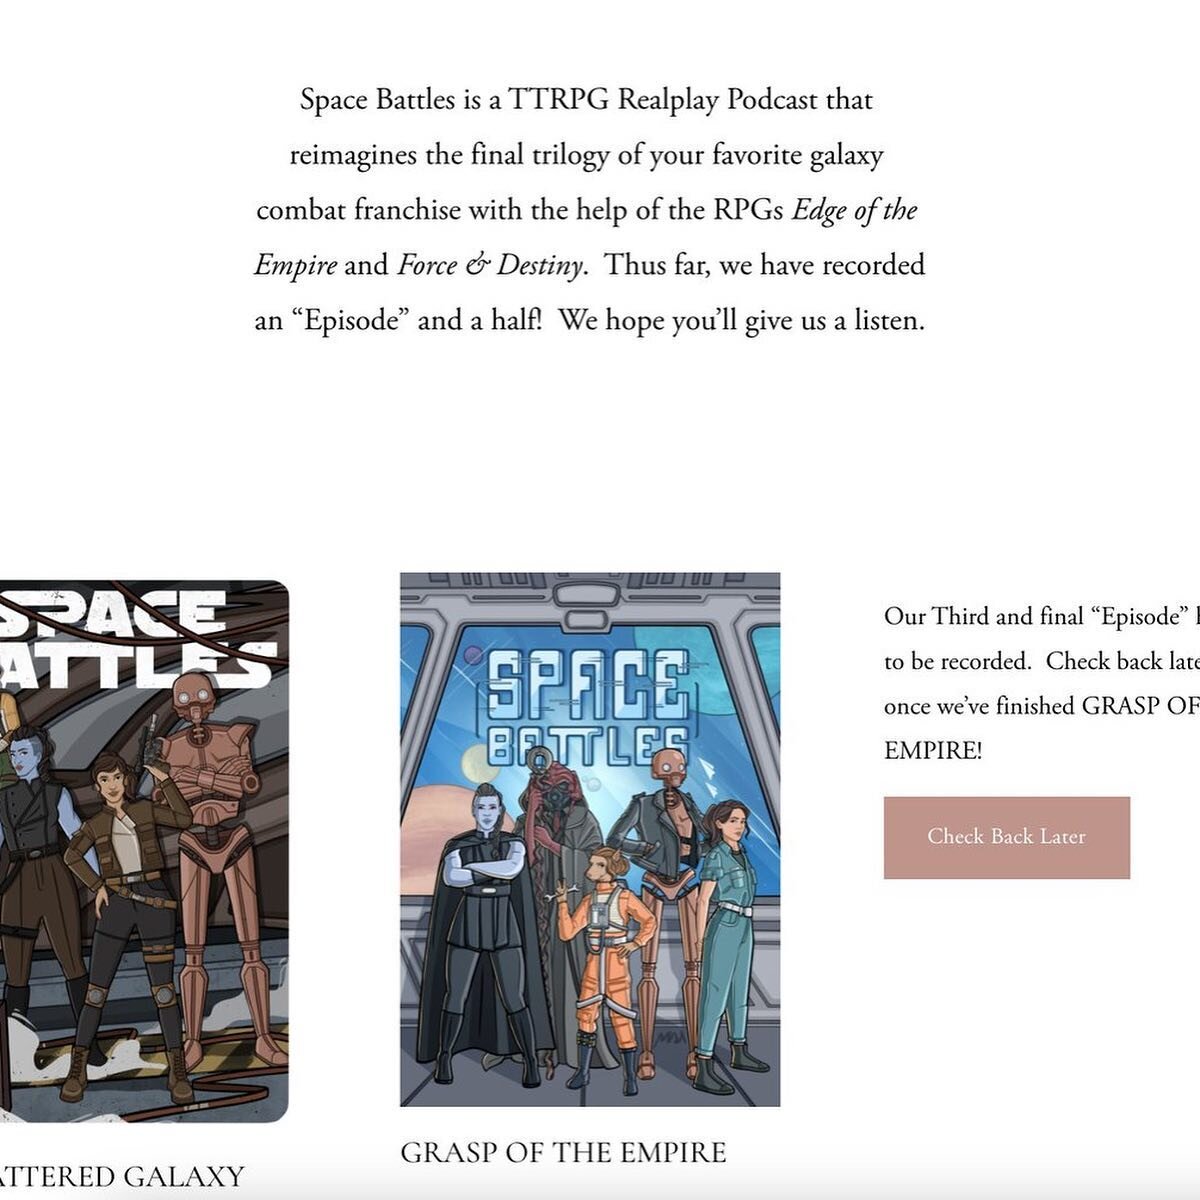 We've updated our website! 

Now on spacebattlespodcast.com, you can find:

🌟 All of our Episodes
🌟 All of our Music
🌟 Art of our show
🌟 Character and Player Bios
🌟 #TTRPG and #Gensys resources!

#starwars #starwarsrp #starwarspodcast #realplay 